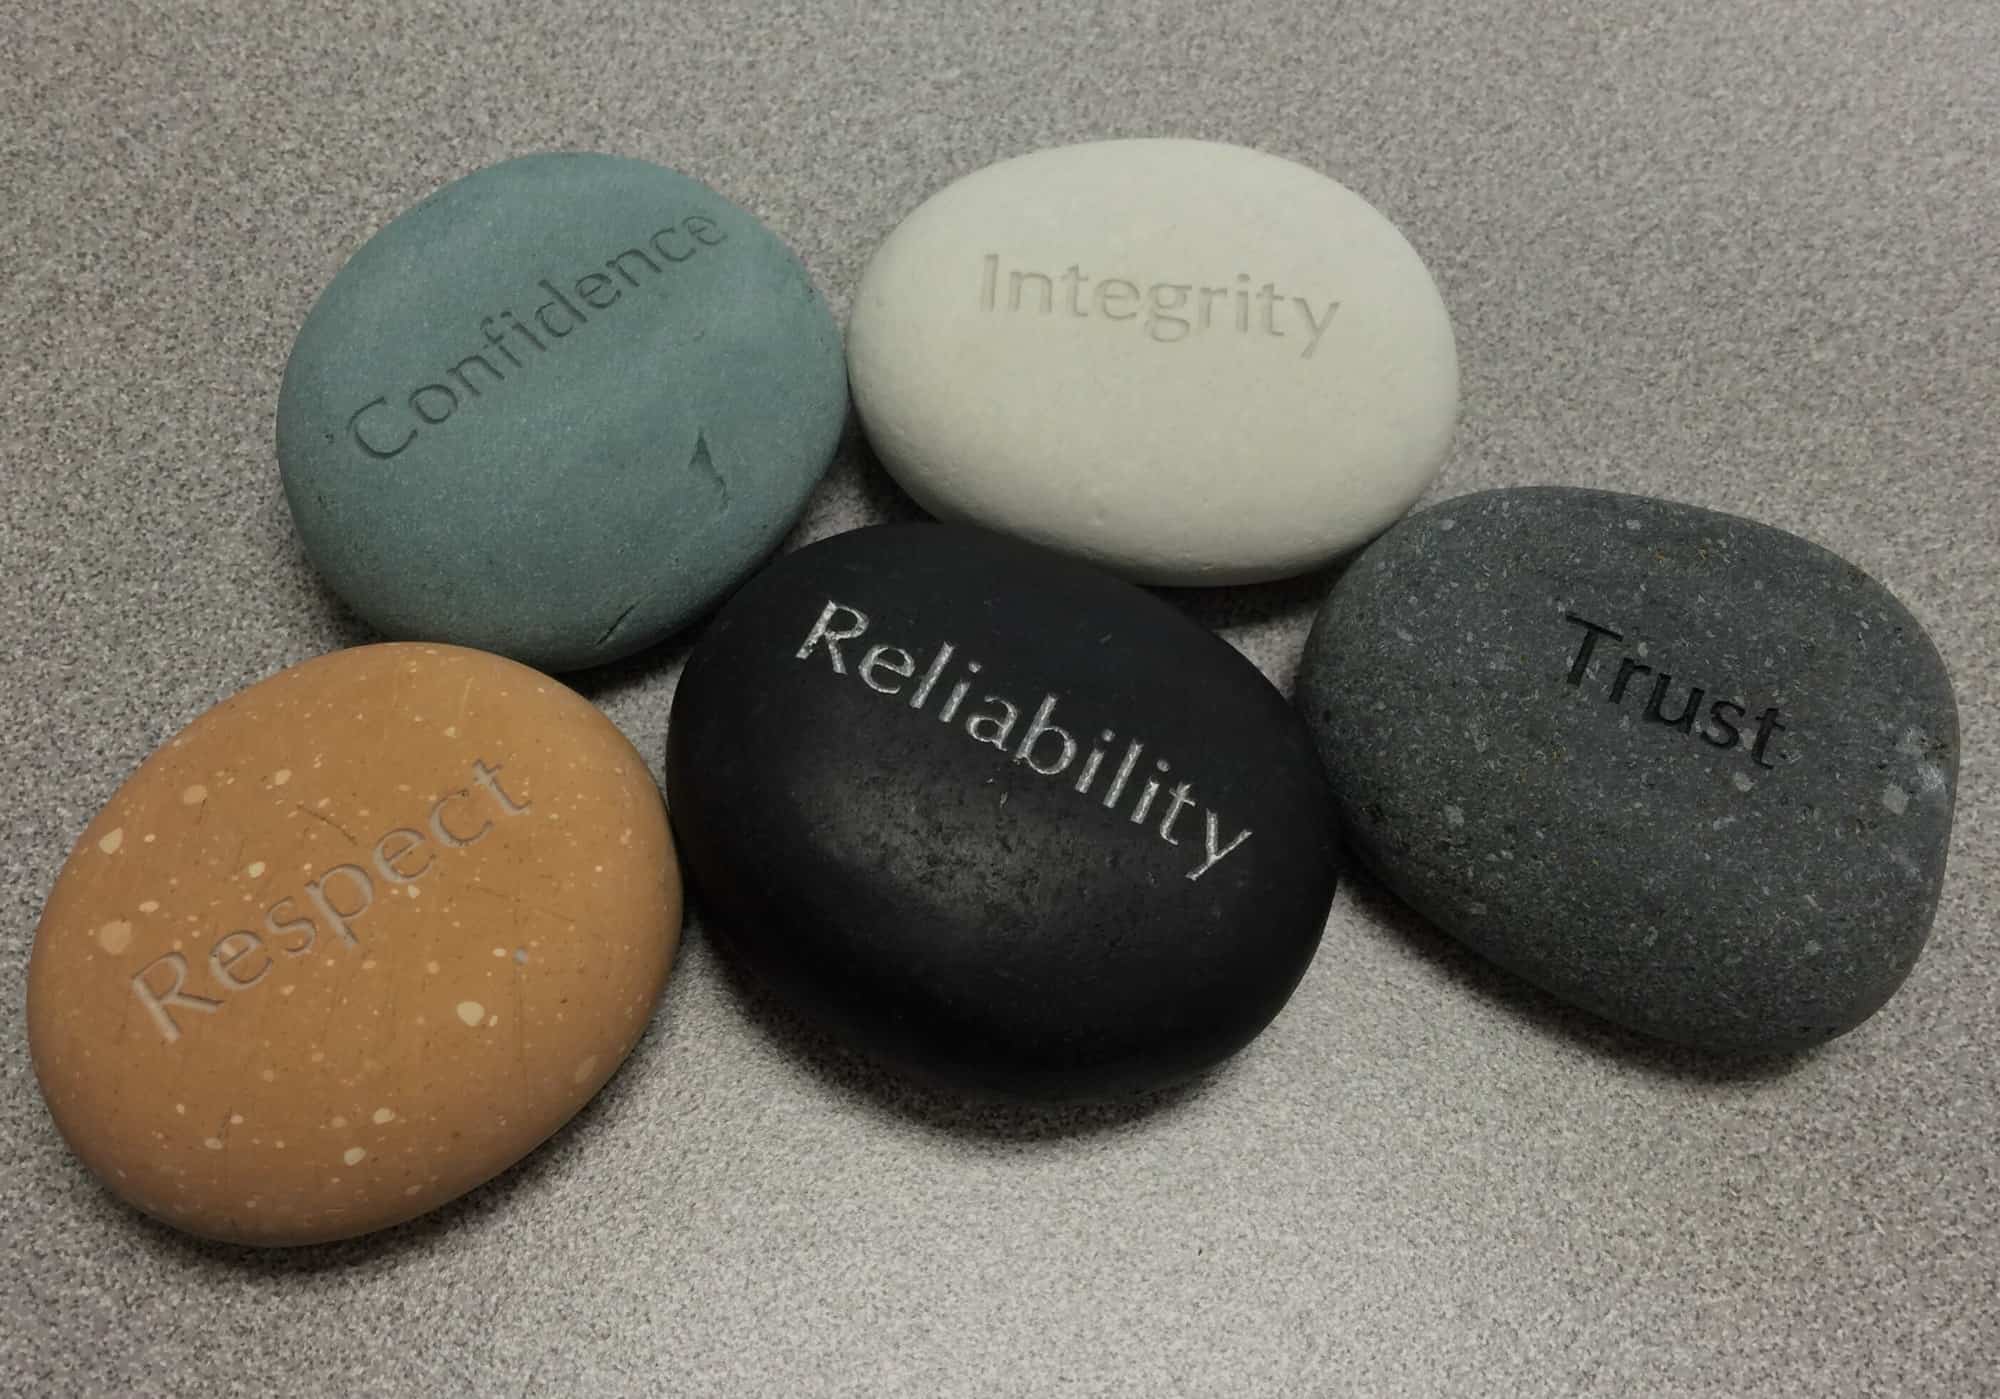 On Being a Leader of Integrity: 4 Ways to Build Personal and Organizational Integrity